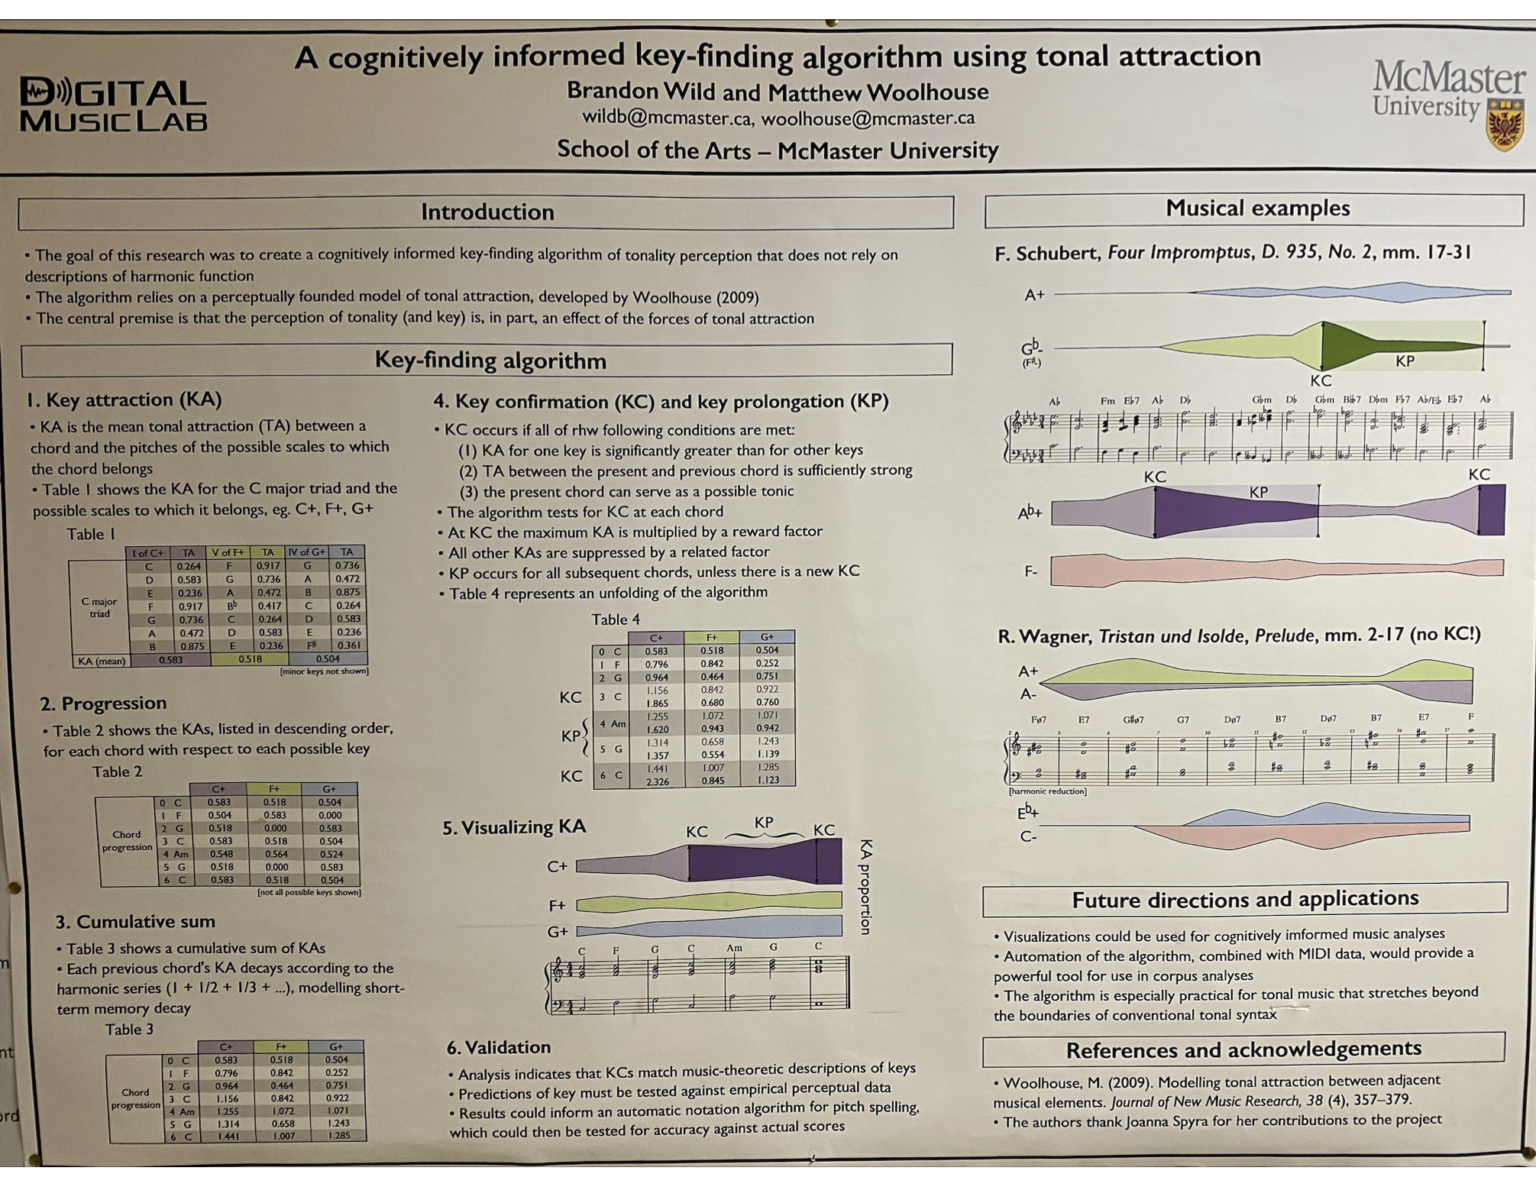 The poster for "A cognitively informed key-finding algorithm using tonal attraction" by Brandon Wild and Matthew Woolhouse.